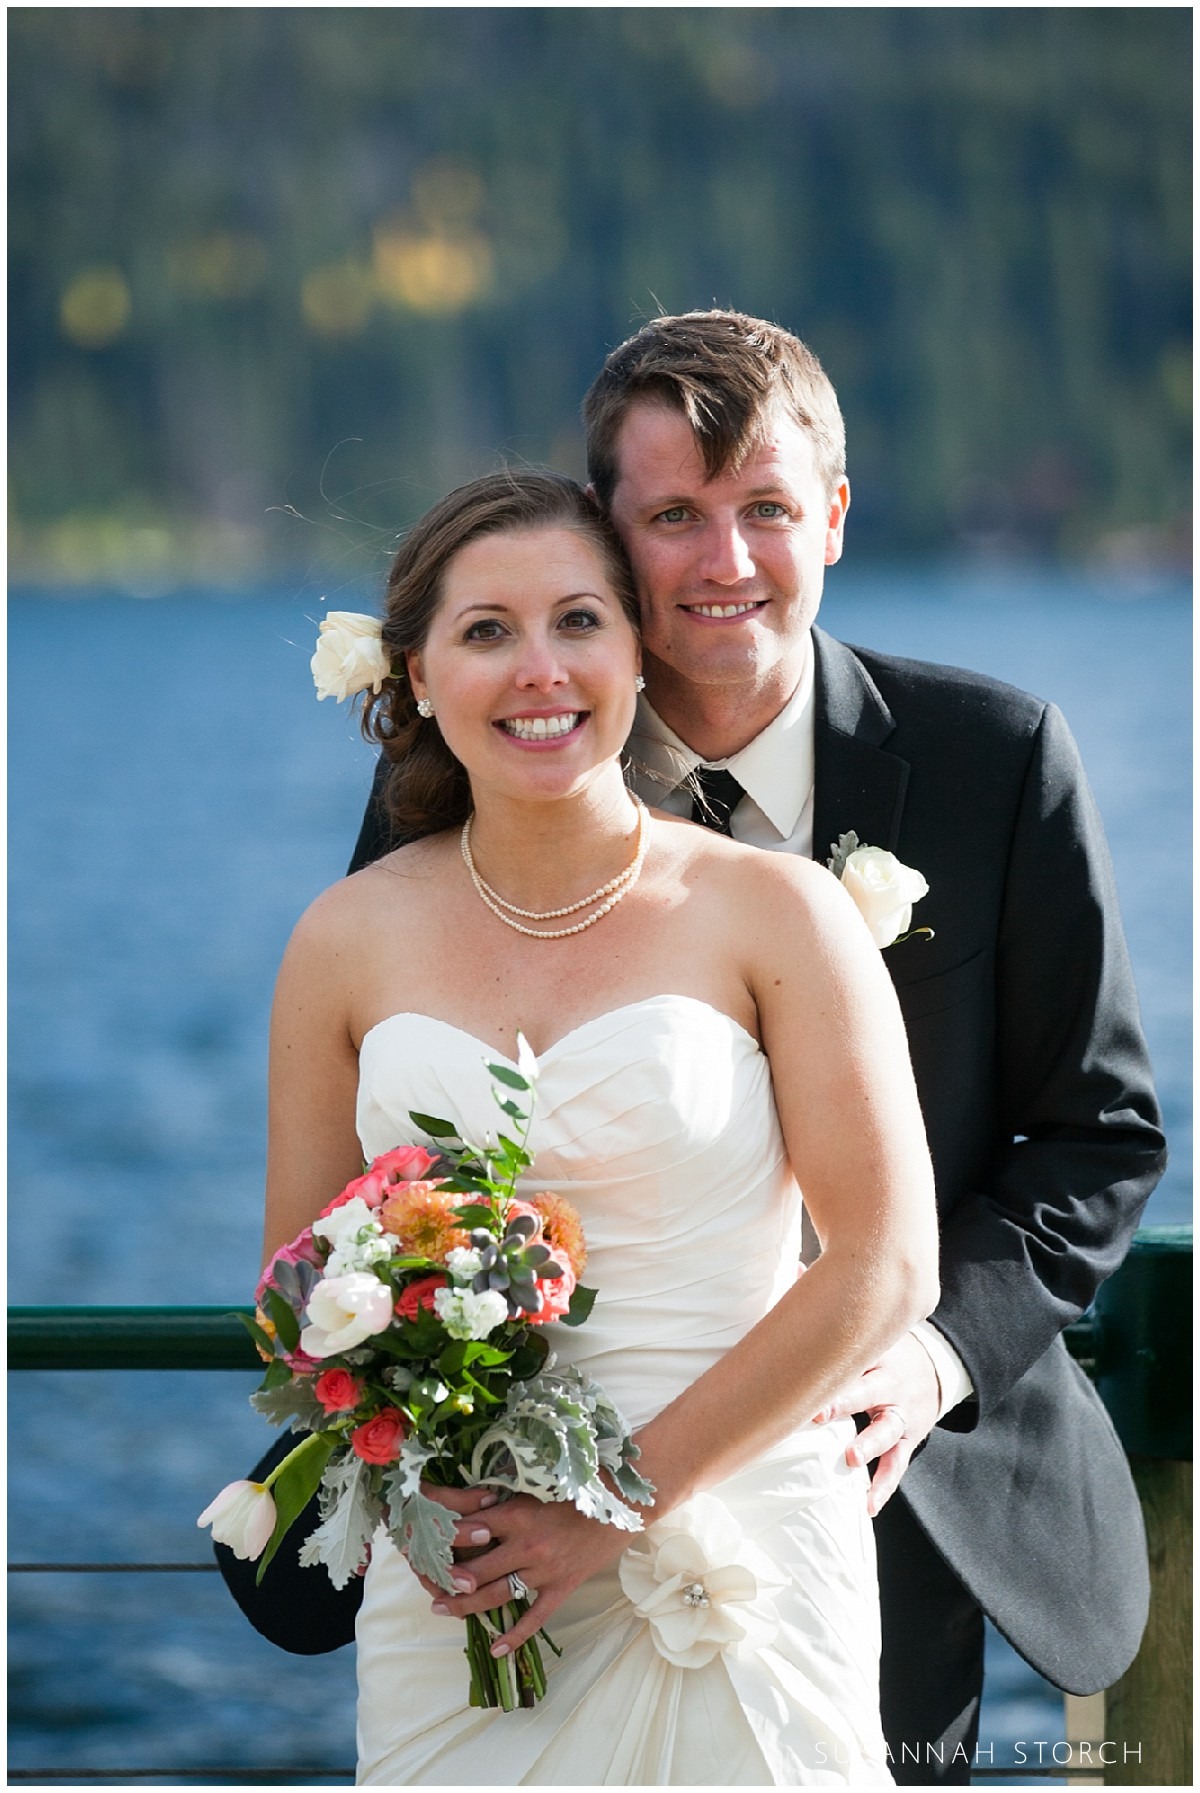 a bride and groom pose for a formal portrait with a lake in the background